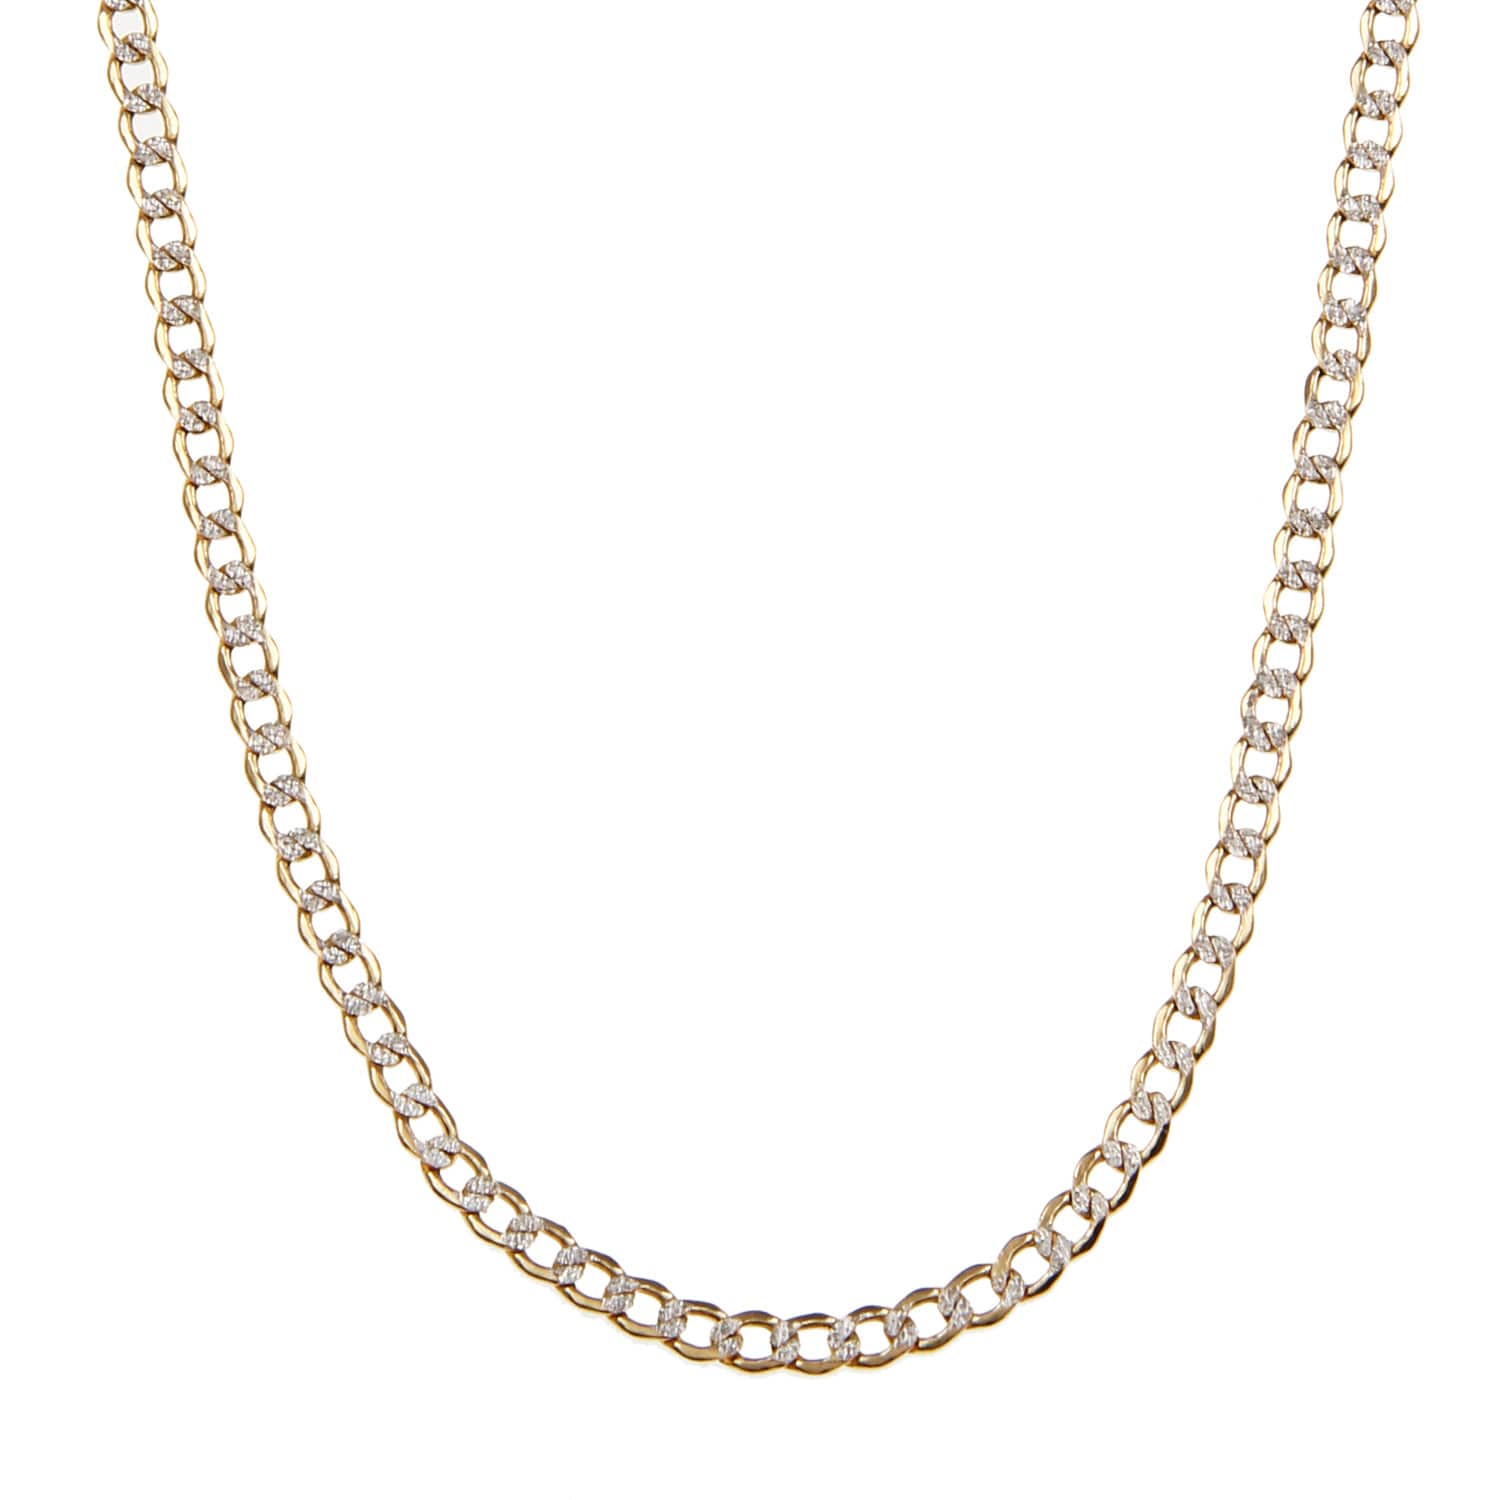 Golden Tone Chain Necklace